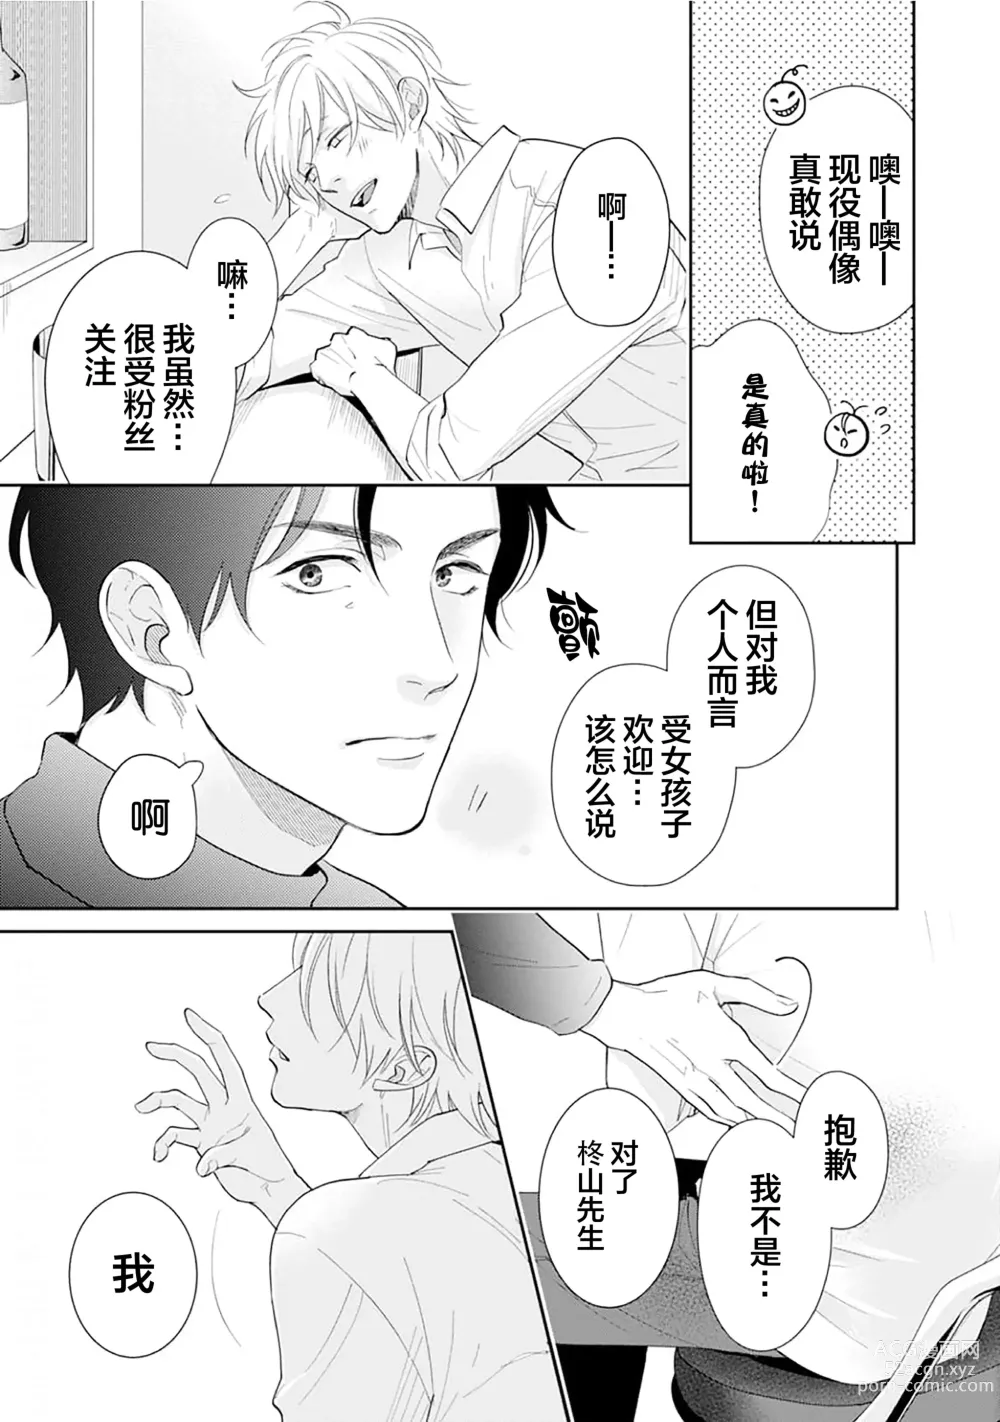 Page 25 of manga Toshiue no hitoーsecond bloomー｜年上之人—second bloom—Chinese]